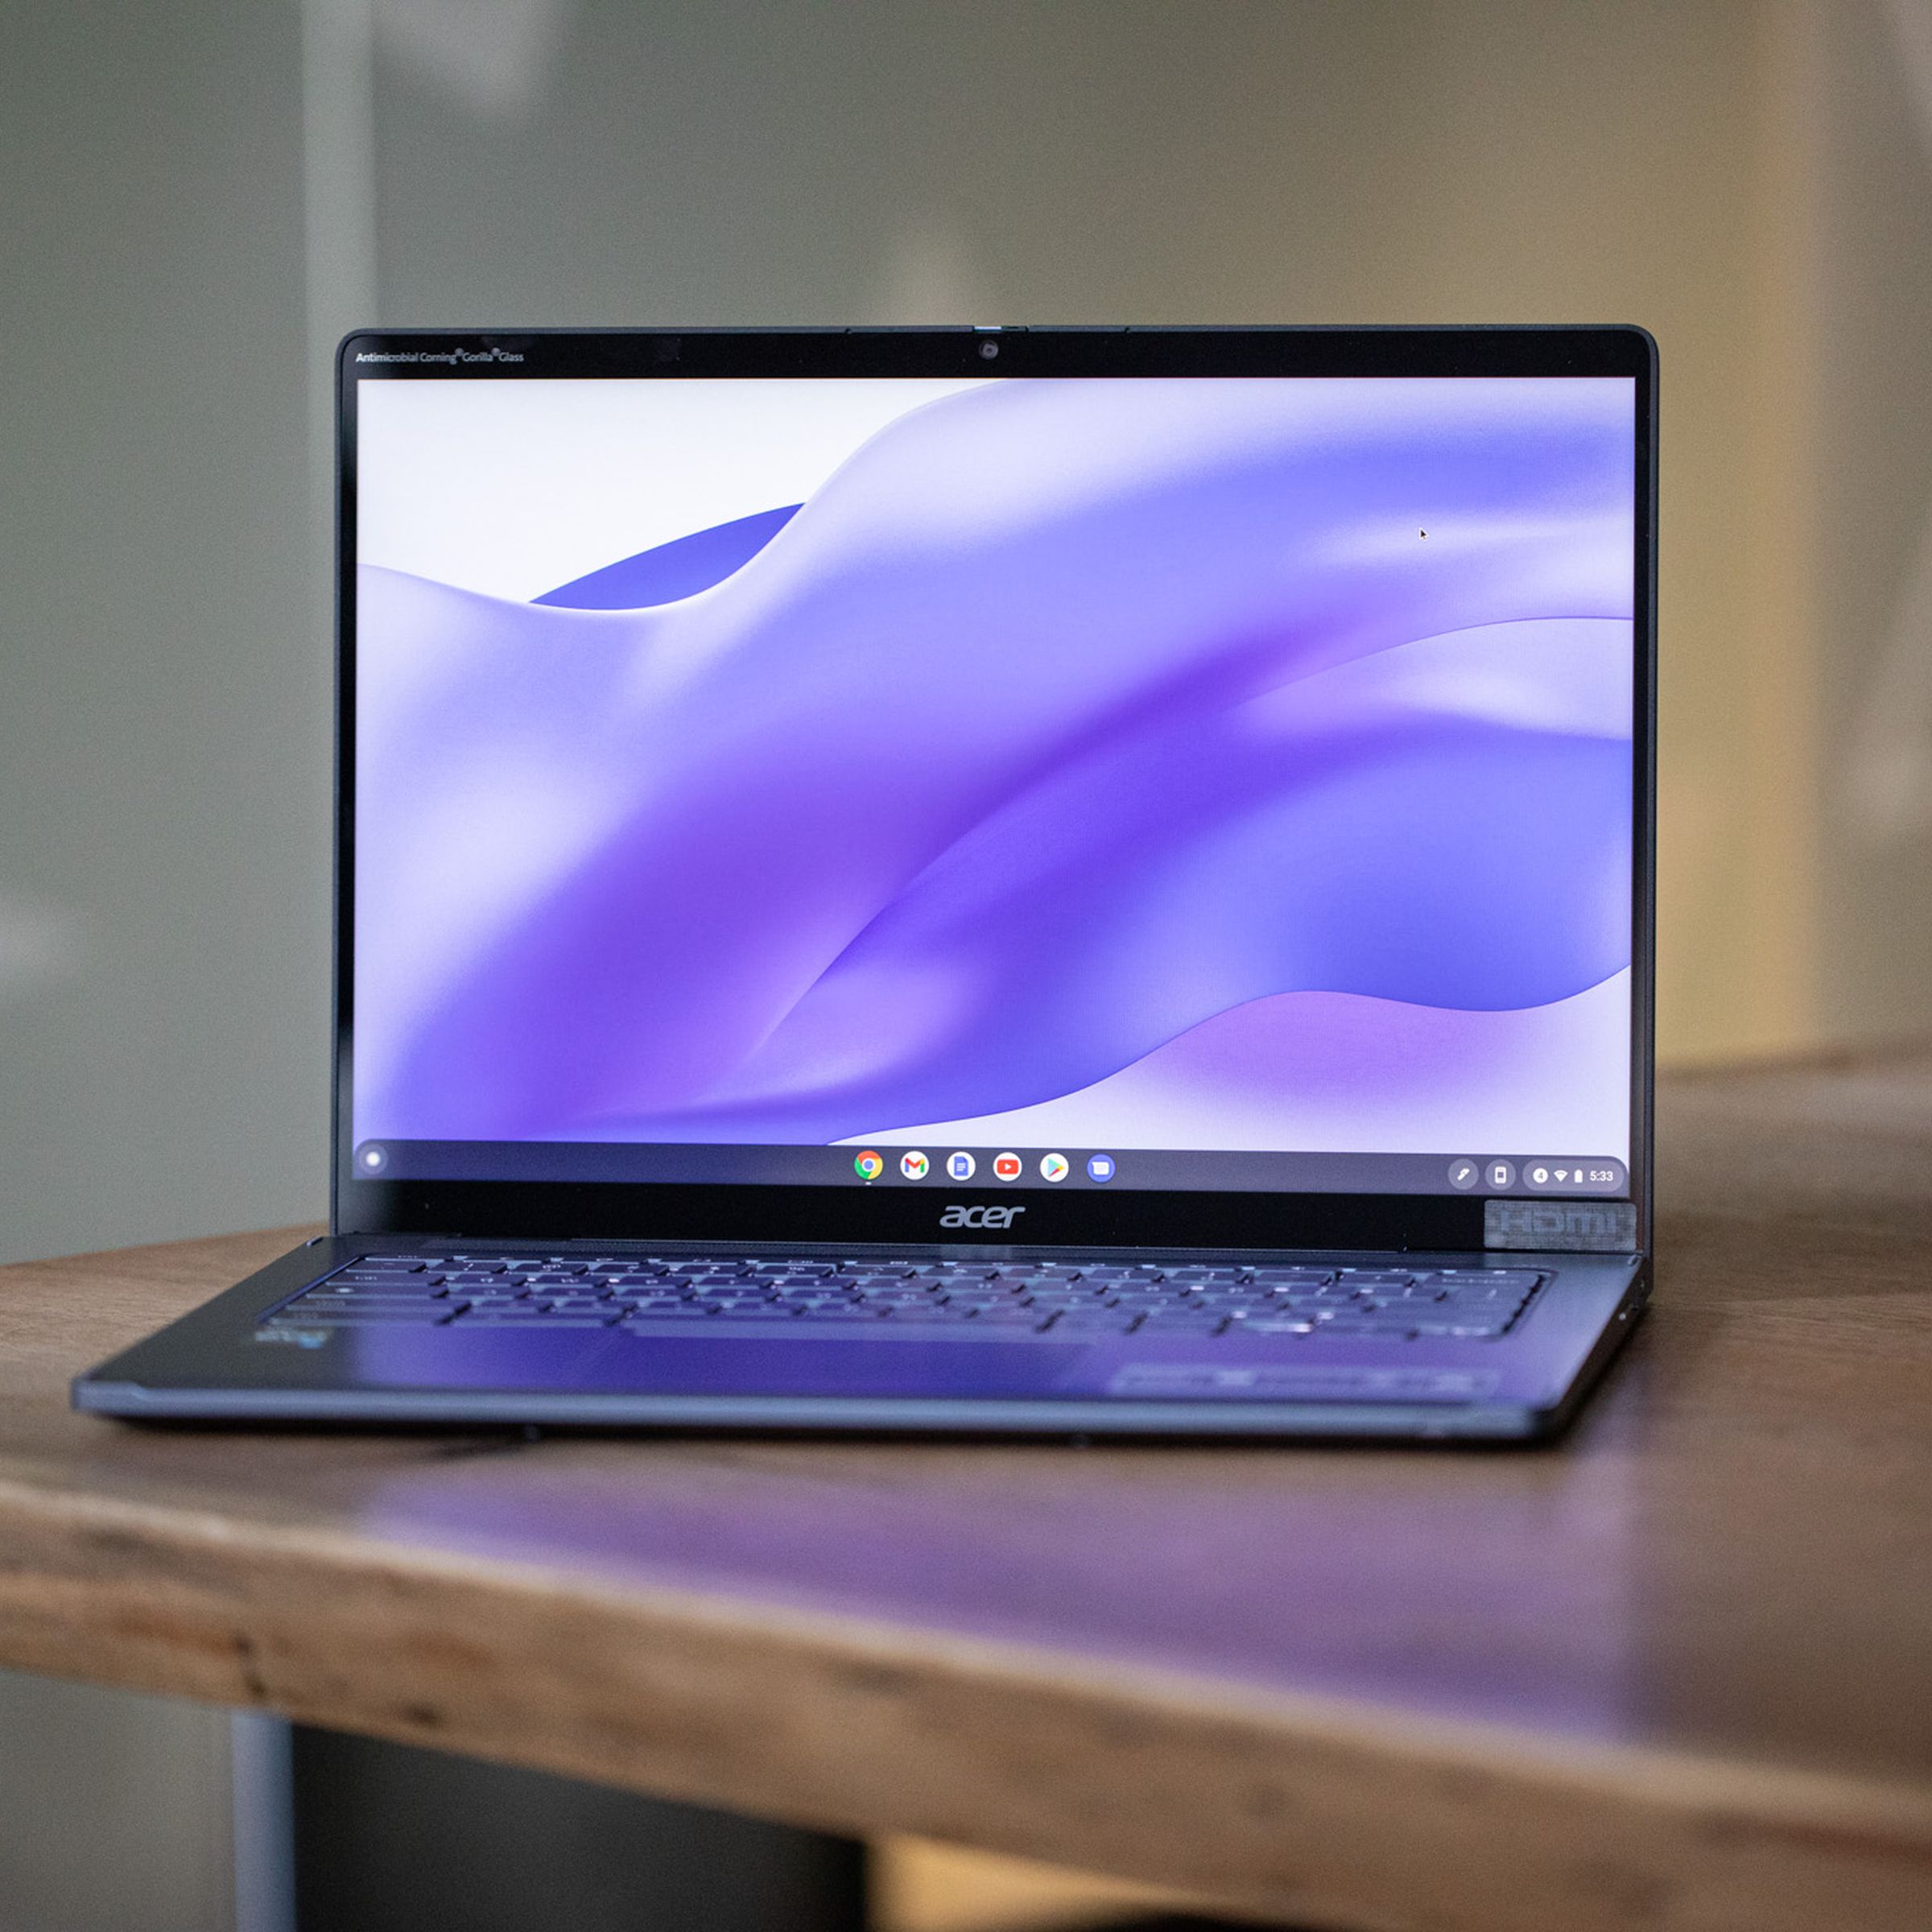 The Acer Chromebook Spin 714 open on a table. The screen displays a purple painted background.